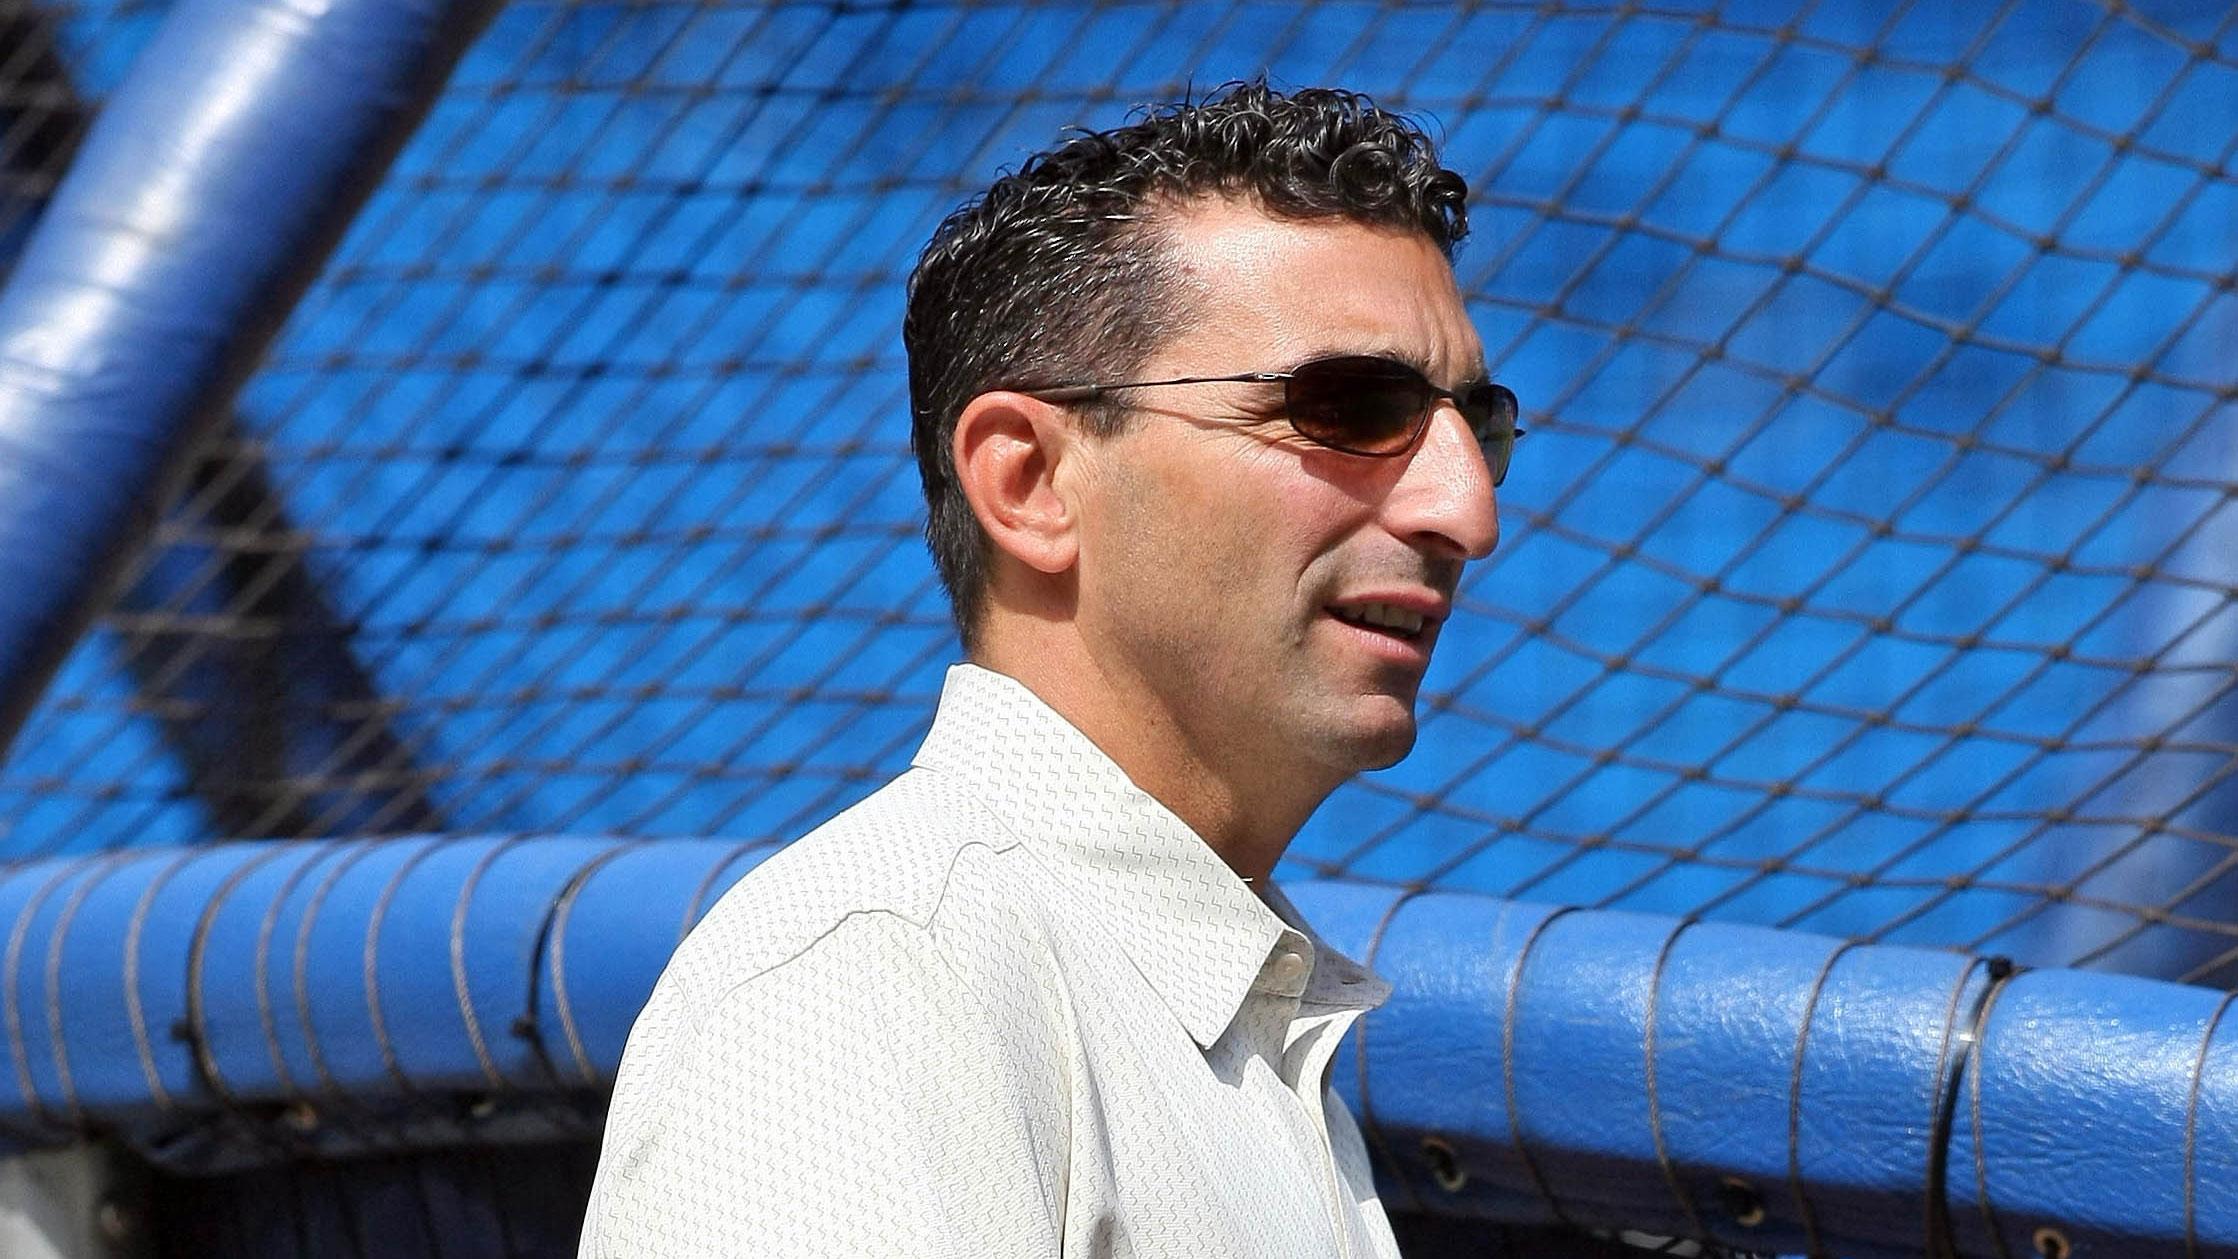 Jul 22, 2007; Toronto, ON, Canada; Toronto Blue Jays general manager J.P. Ricciardi before their game against the Seattle Mariners at the Rogers Centre in Toronto, ON. / Tom Szczerbowski-USA TODAY Sports